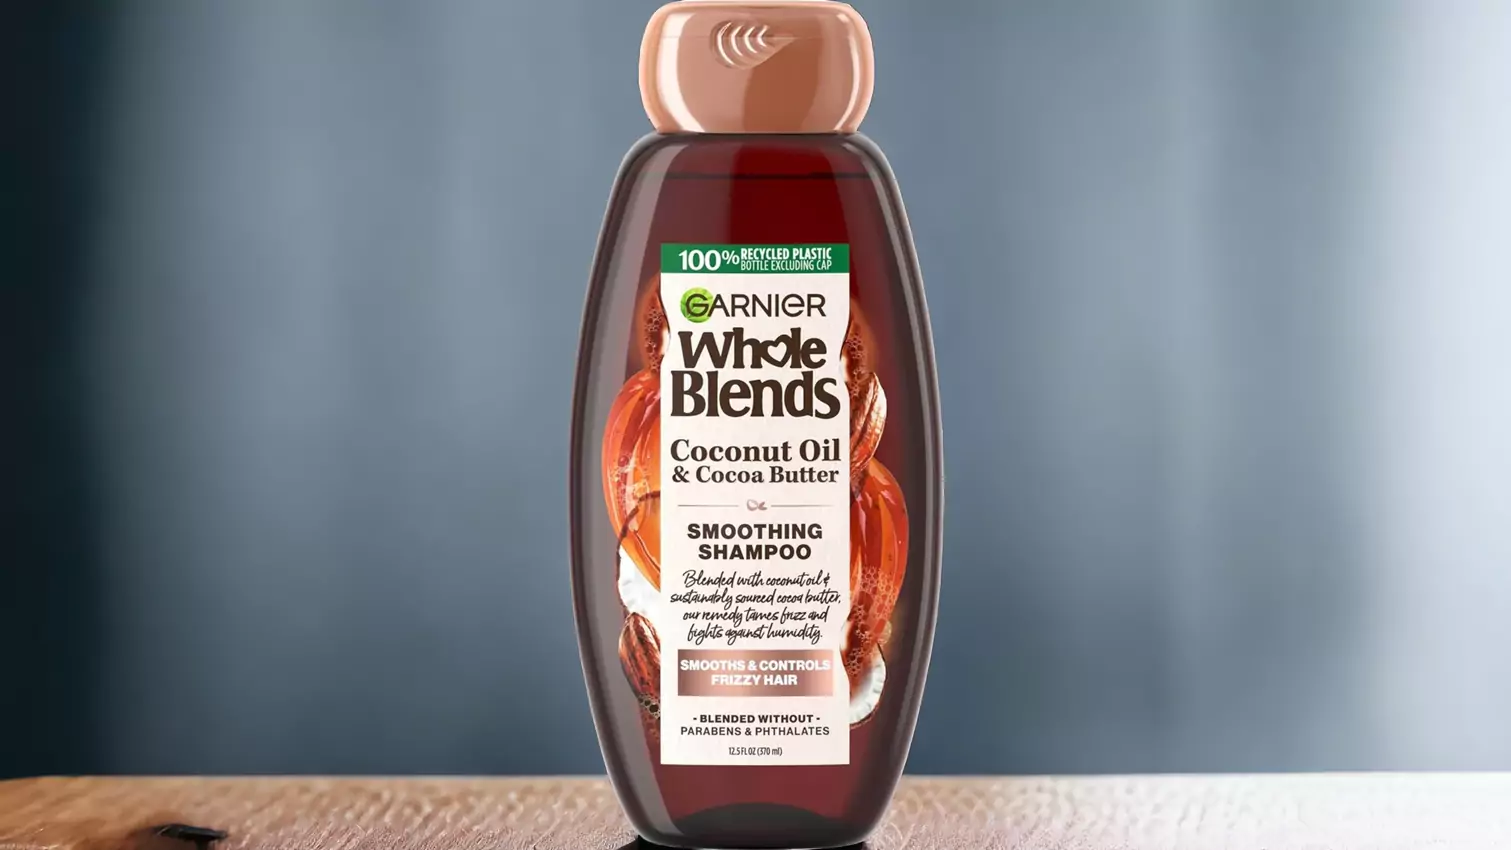 Garnier Whole Blends Coconut Oil & Cocoa Butter Smoothing Shampoo